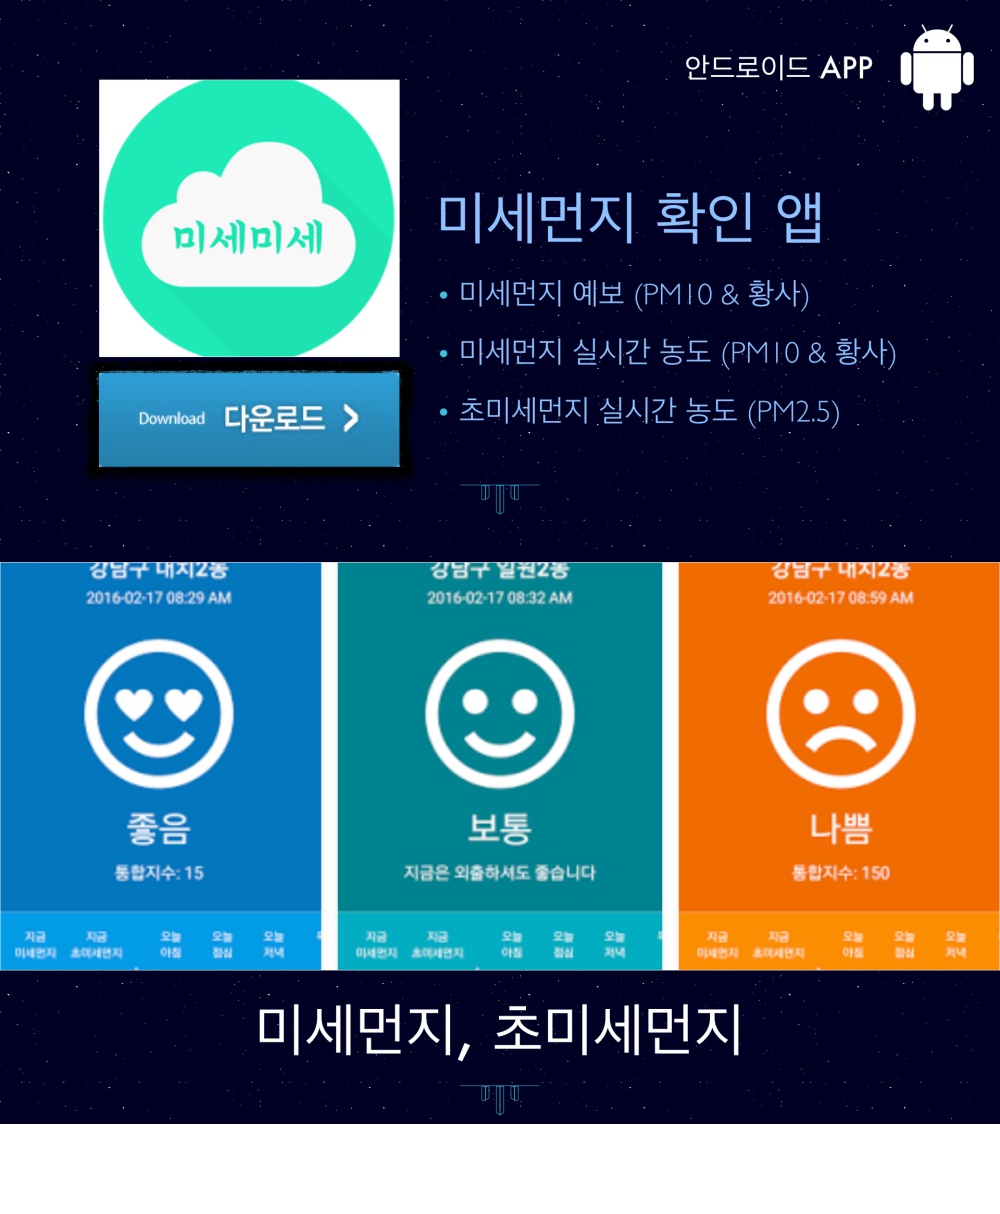 https://play.google.com/store/apps/details?id=cheehoon.ha.particulateforecaster